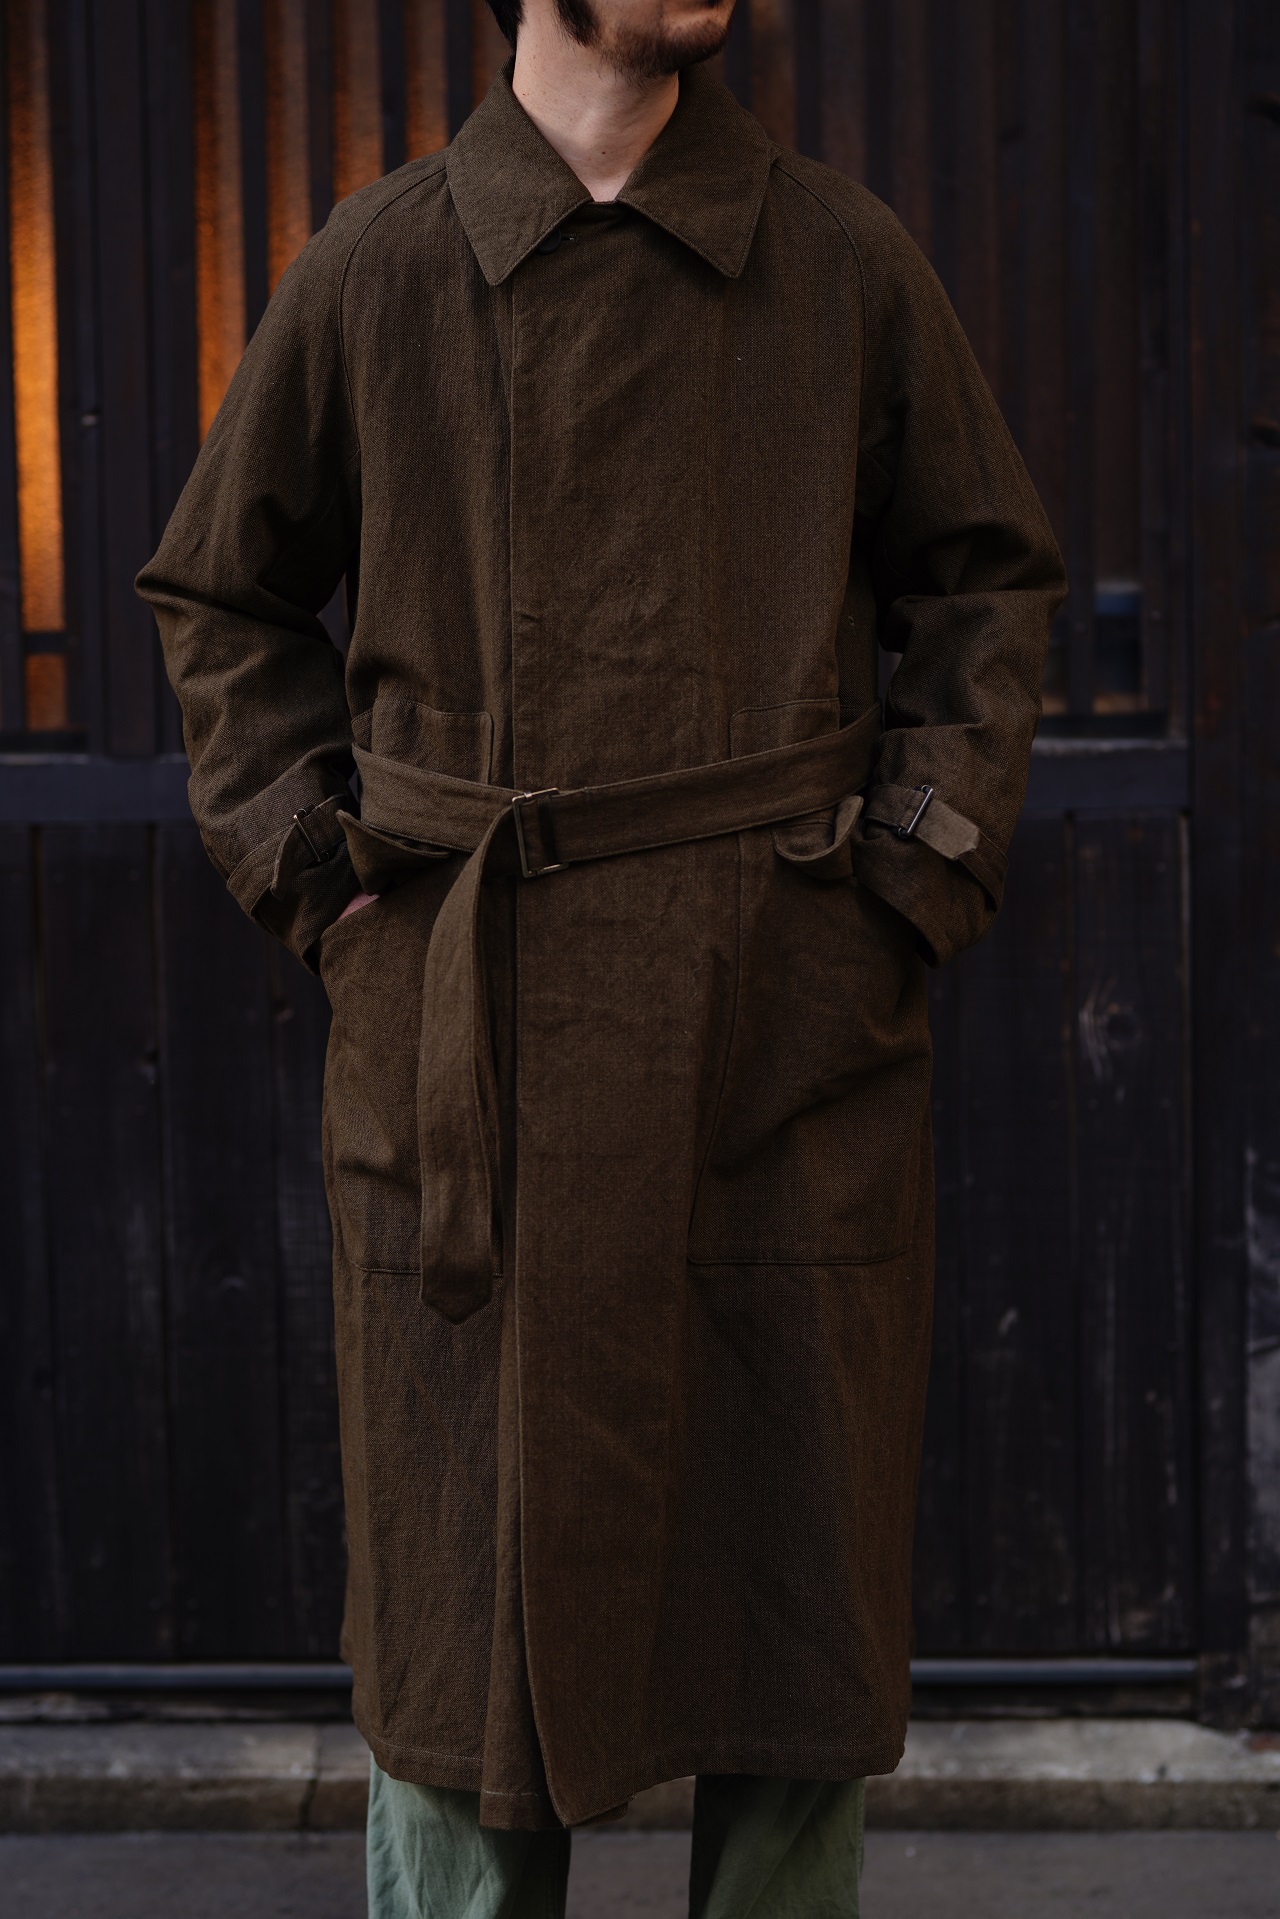 sus-sous / MK-2 motorcycle coat | ARCH アーチ - Sapporo / Tokyo